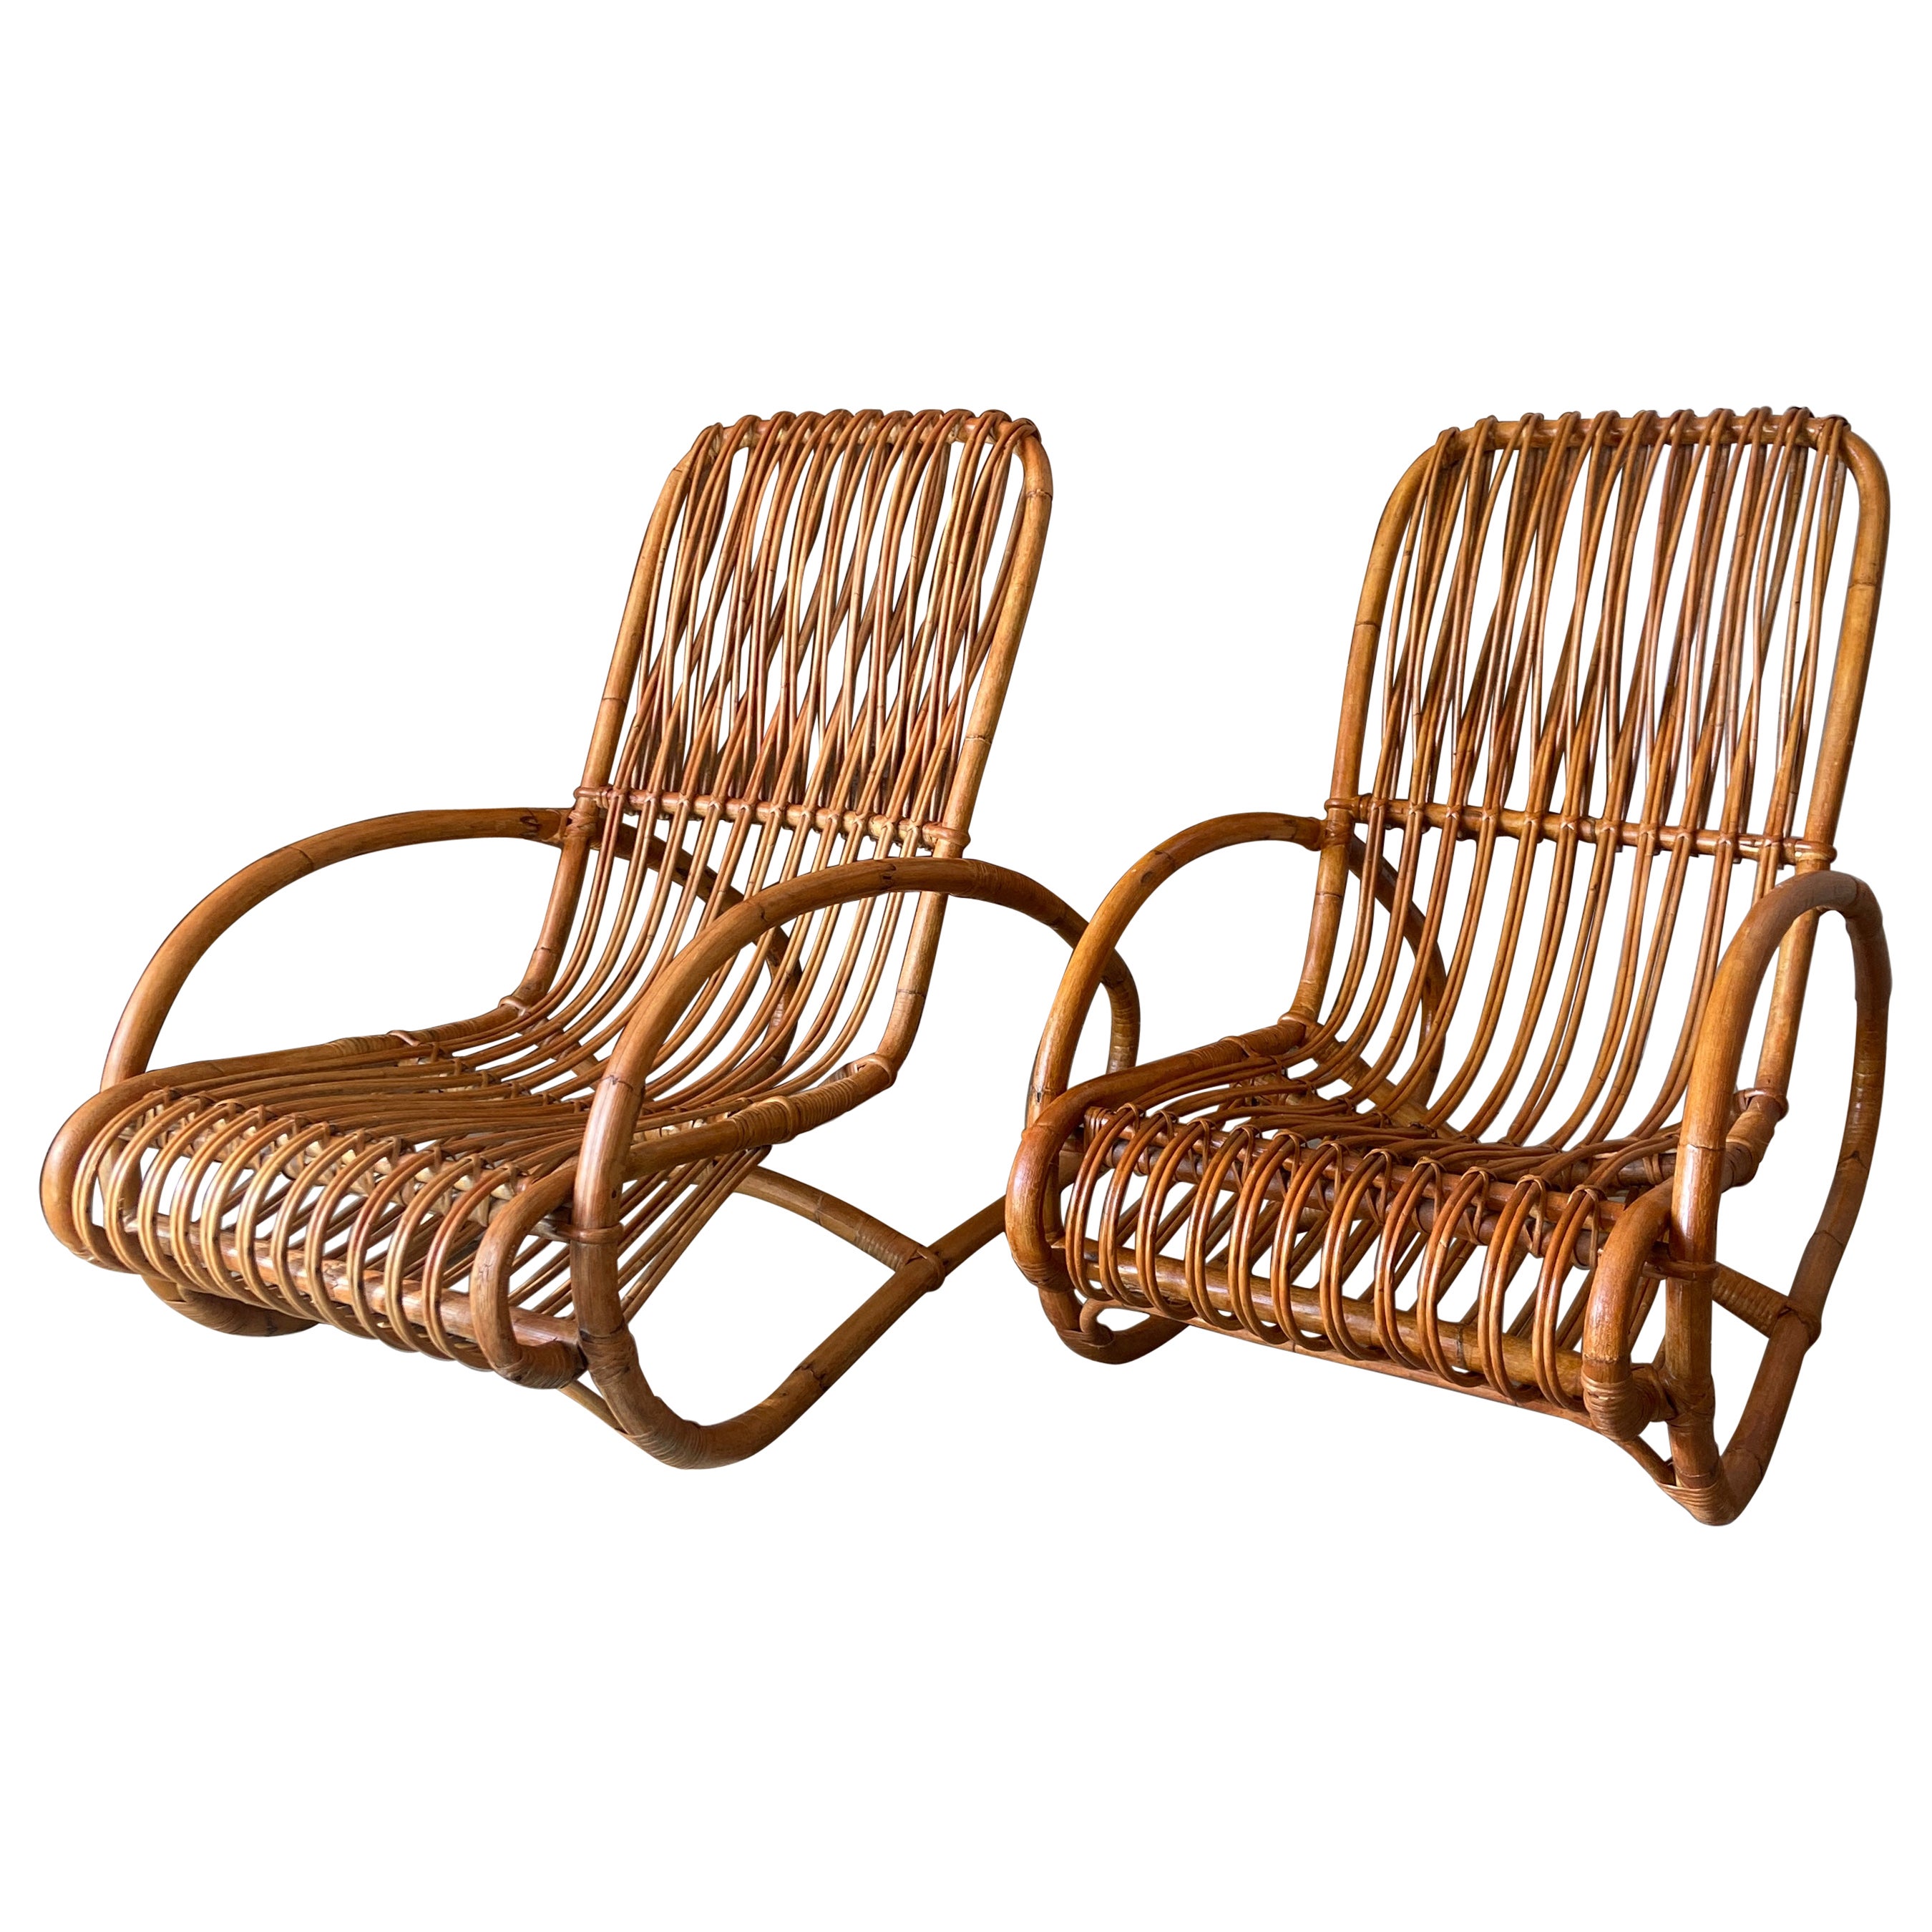 Mid-Century Modern Italian Pair of Bamboo and Rattan Lounge Chairs, 1960s